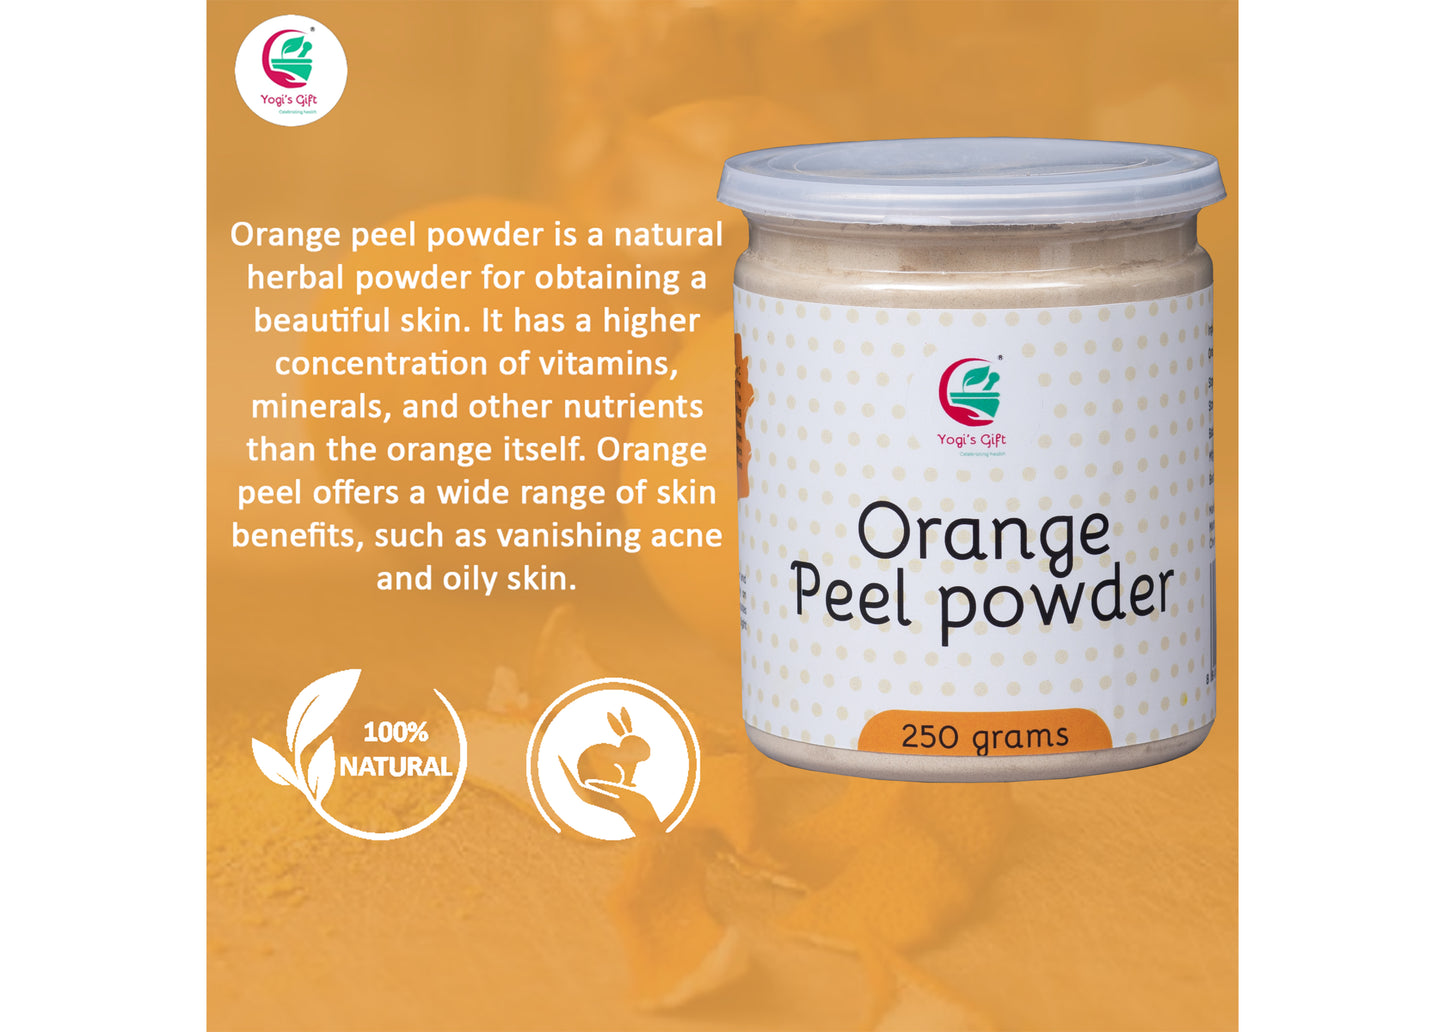 Orange peel powder 250 grams | 100% Natural care for Acne, Tan & Blackheads | Effective DIY face mask ingredient | Rich in Vitamin C | Helps get a glowing skin | by Yogi's Gift®